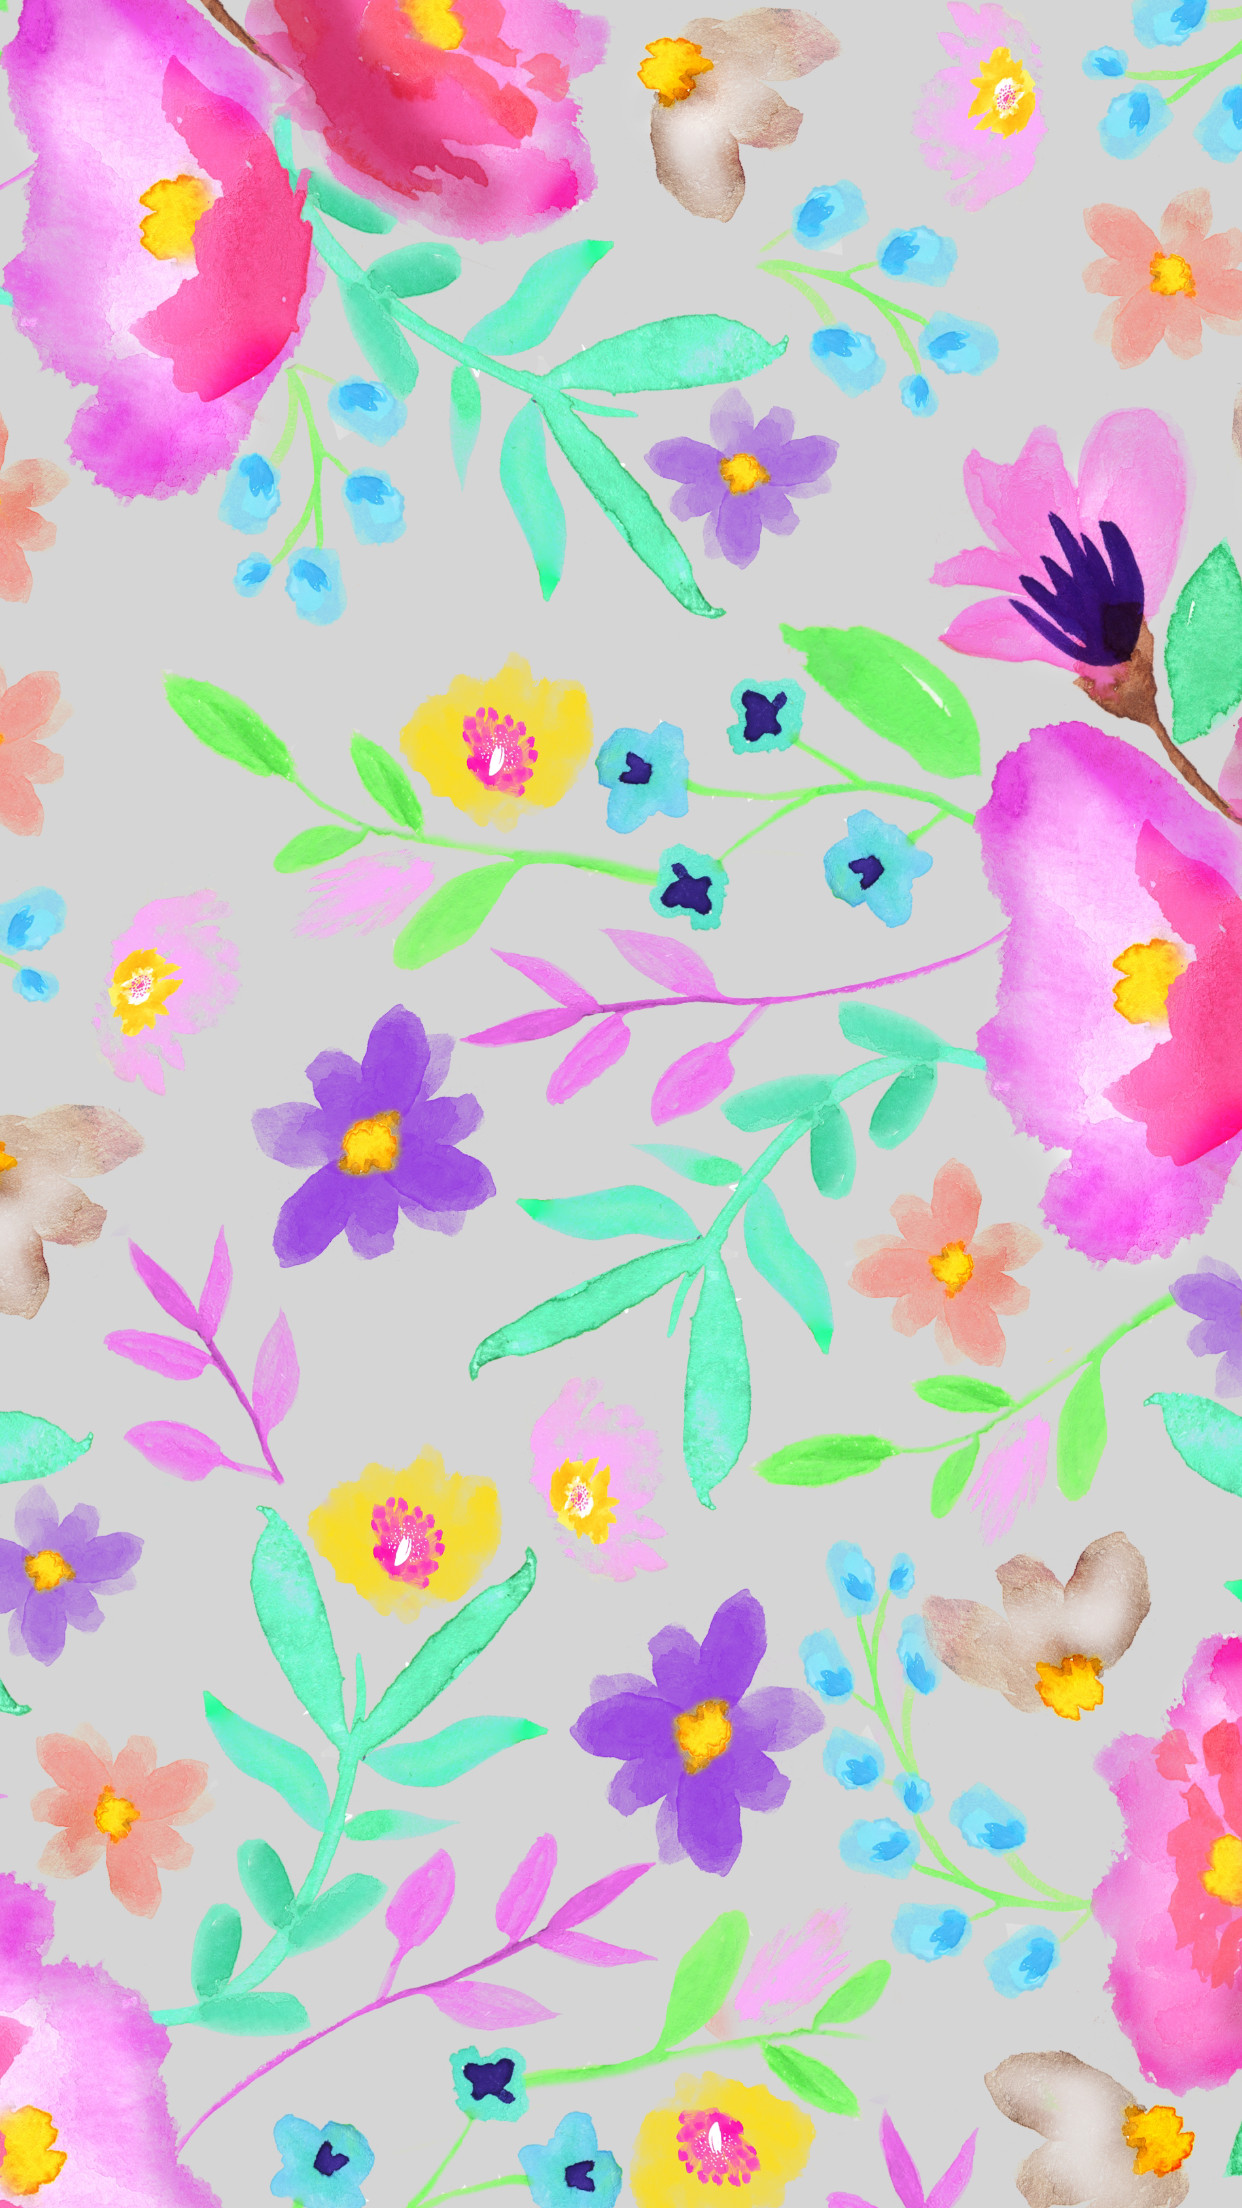 Girly Colorful Wallpaper 
 Data Src Colorful Girly - Transparent Background Spring Flowers Watercolor Clipart - HD Wallpaper 